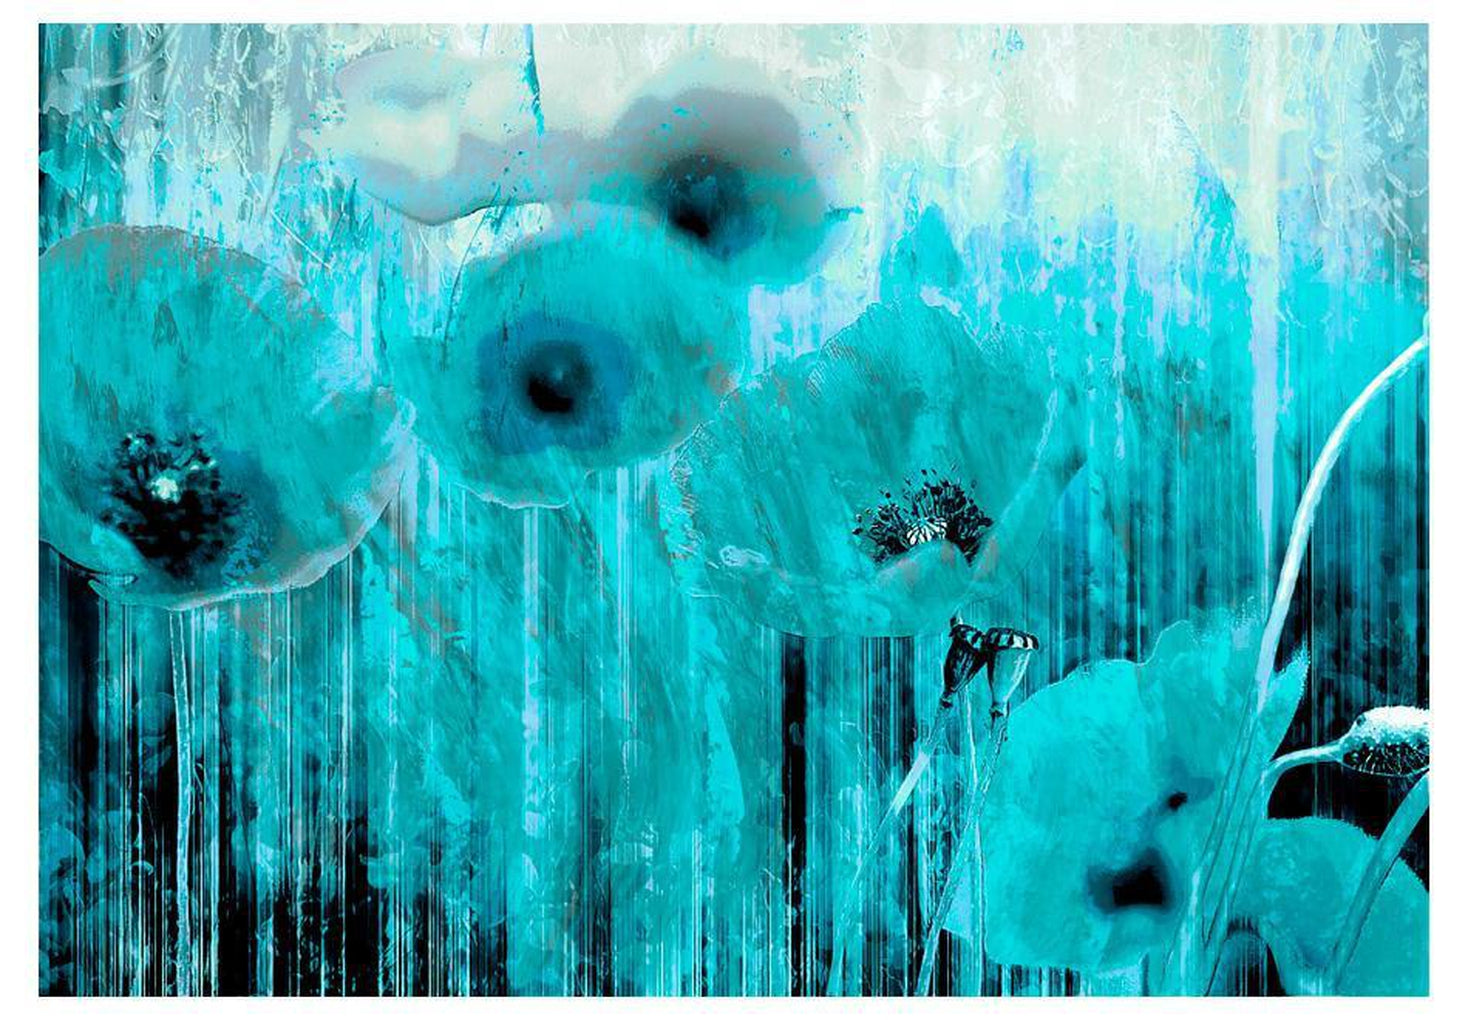 Wall mural - Turquoise madness-TipTopHomeDecor